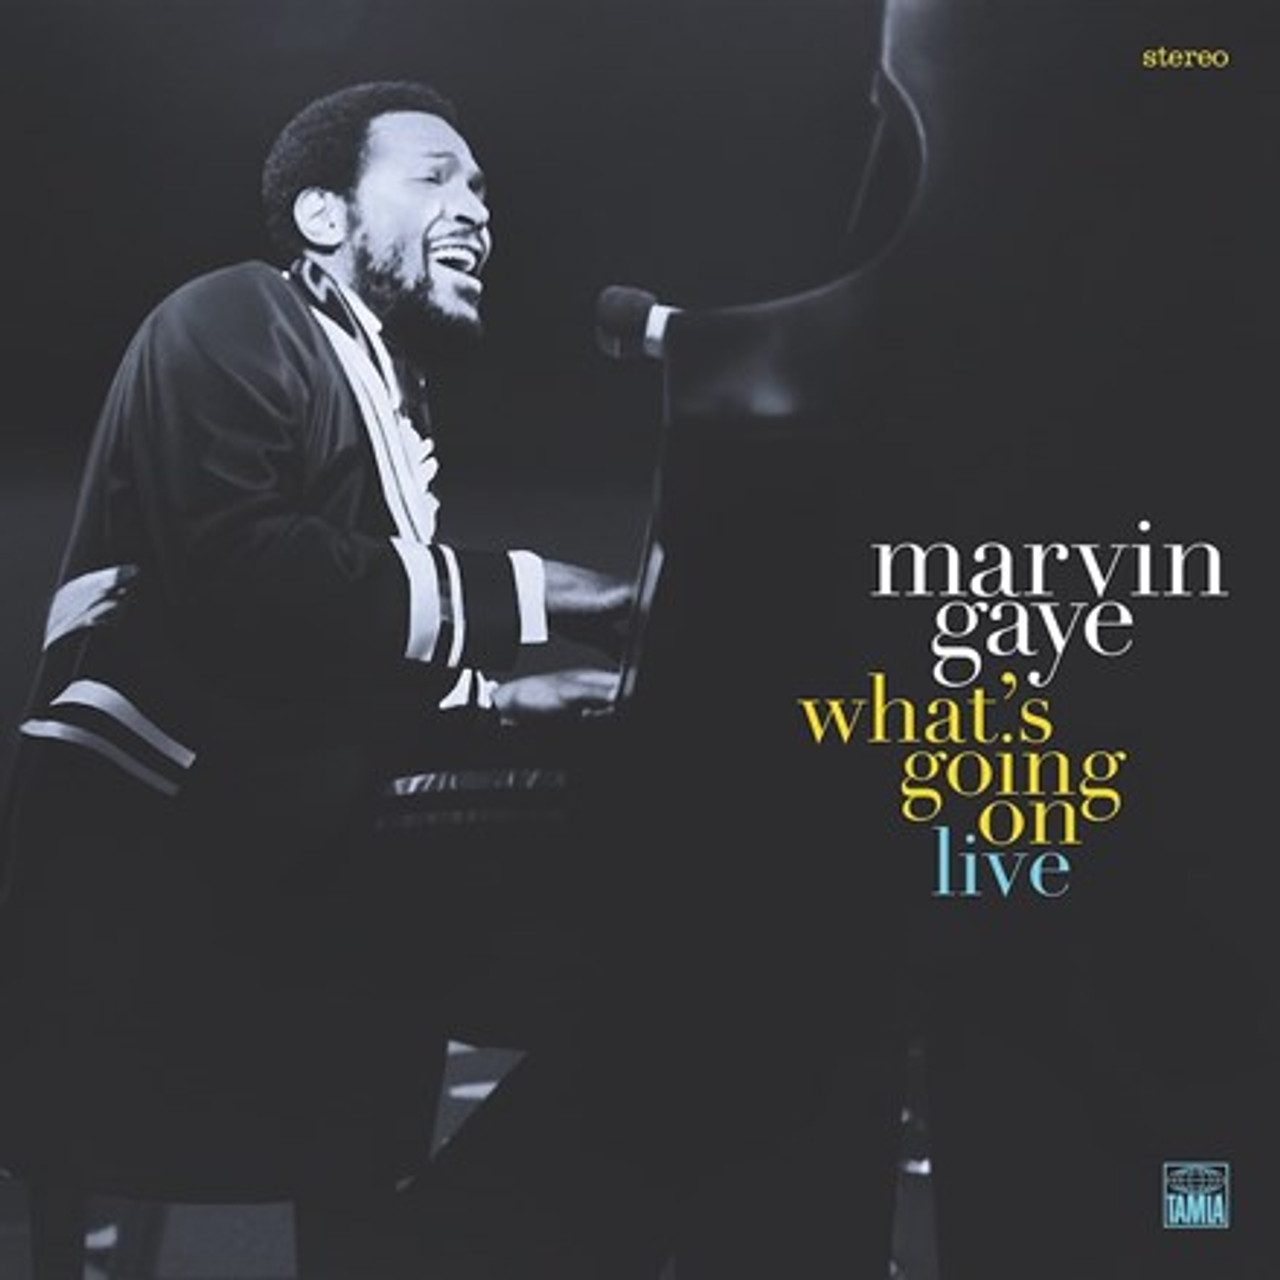 Marvin Gaye - What's Going On: Live (Vinyl 2LP) * * * - Music Direct